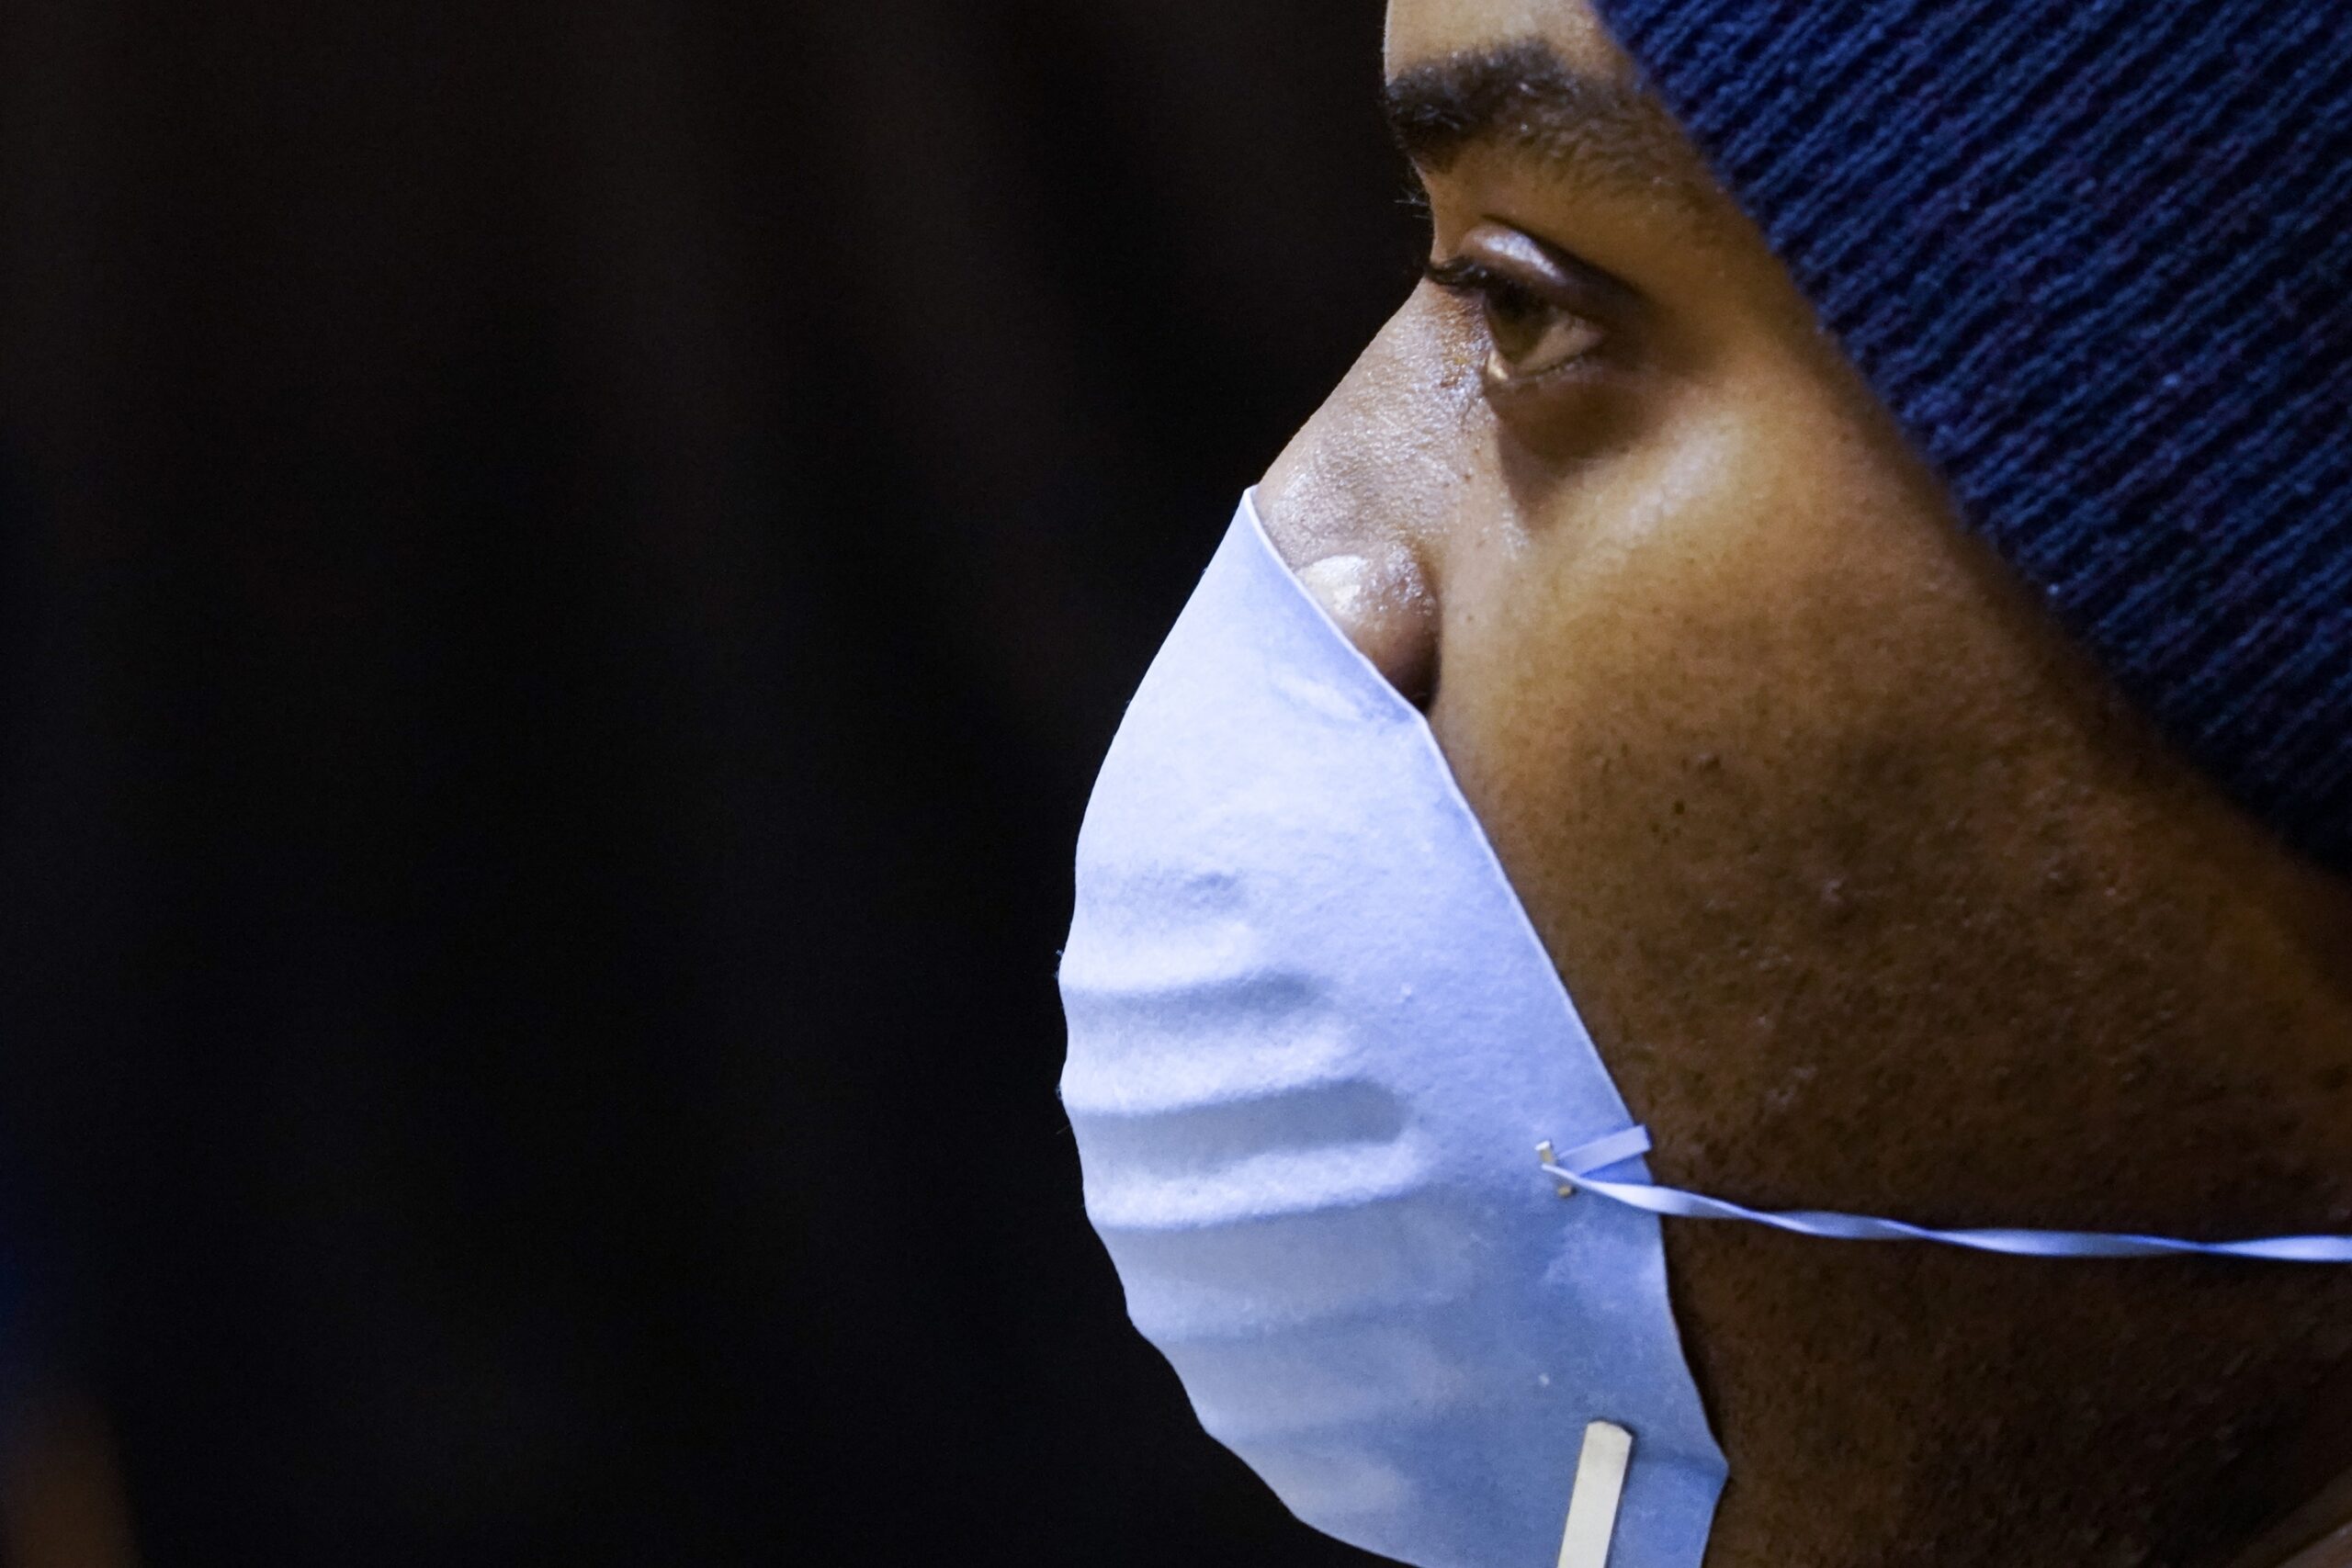 A man wearing a face mask to prevent coronavirus transmission